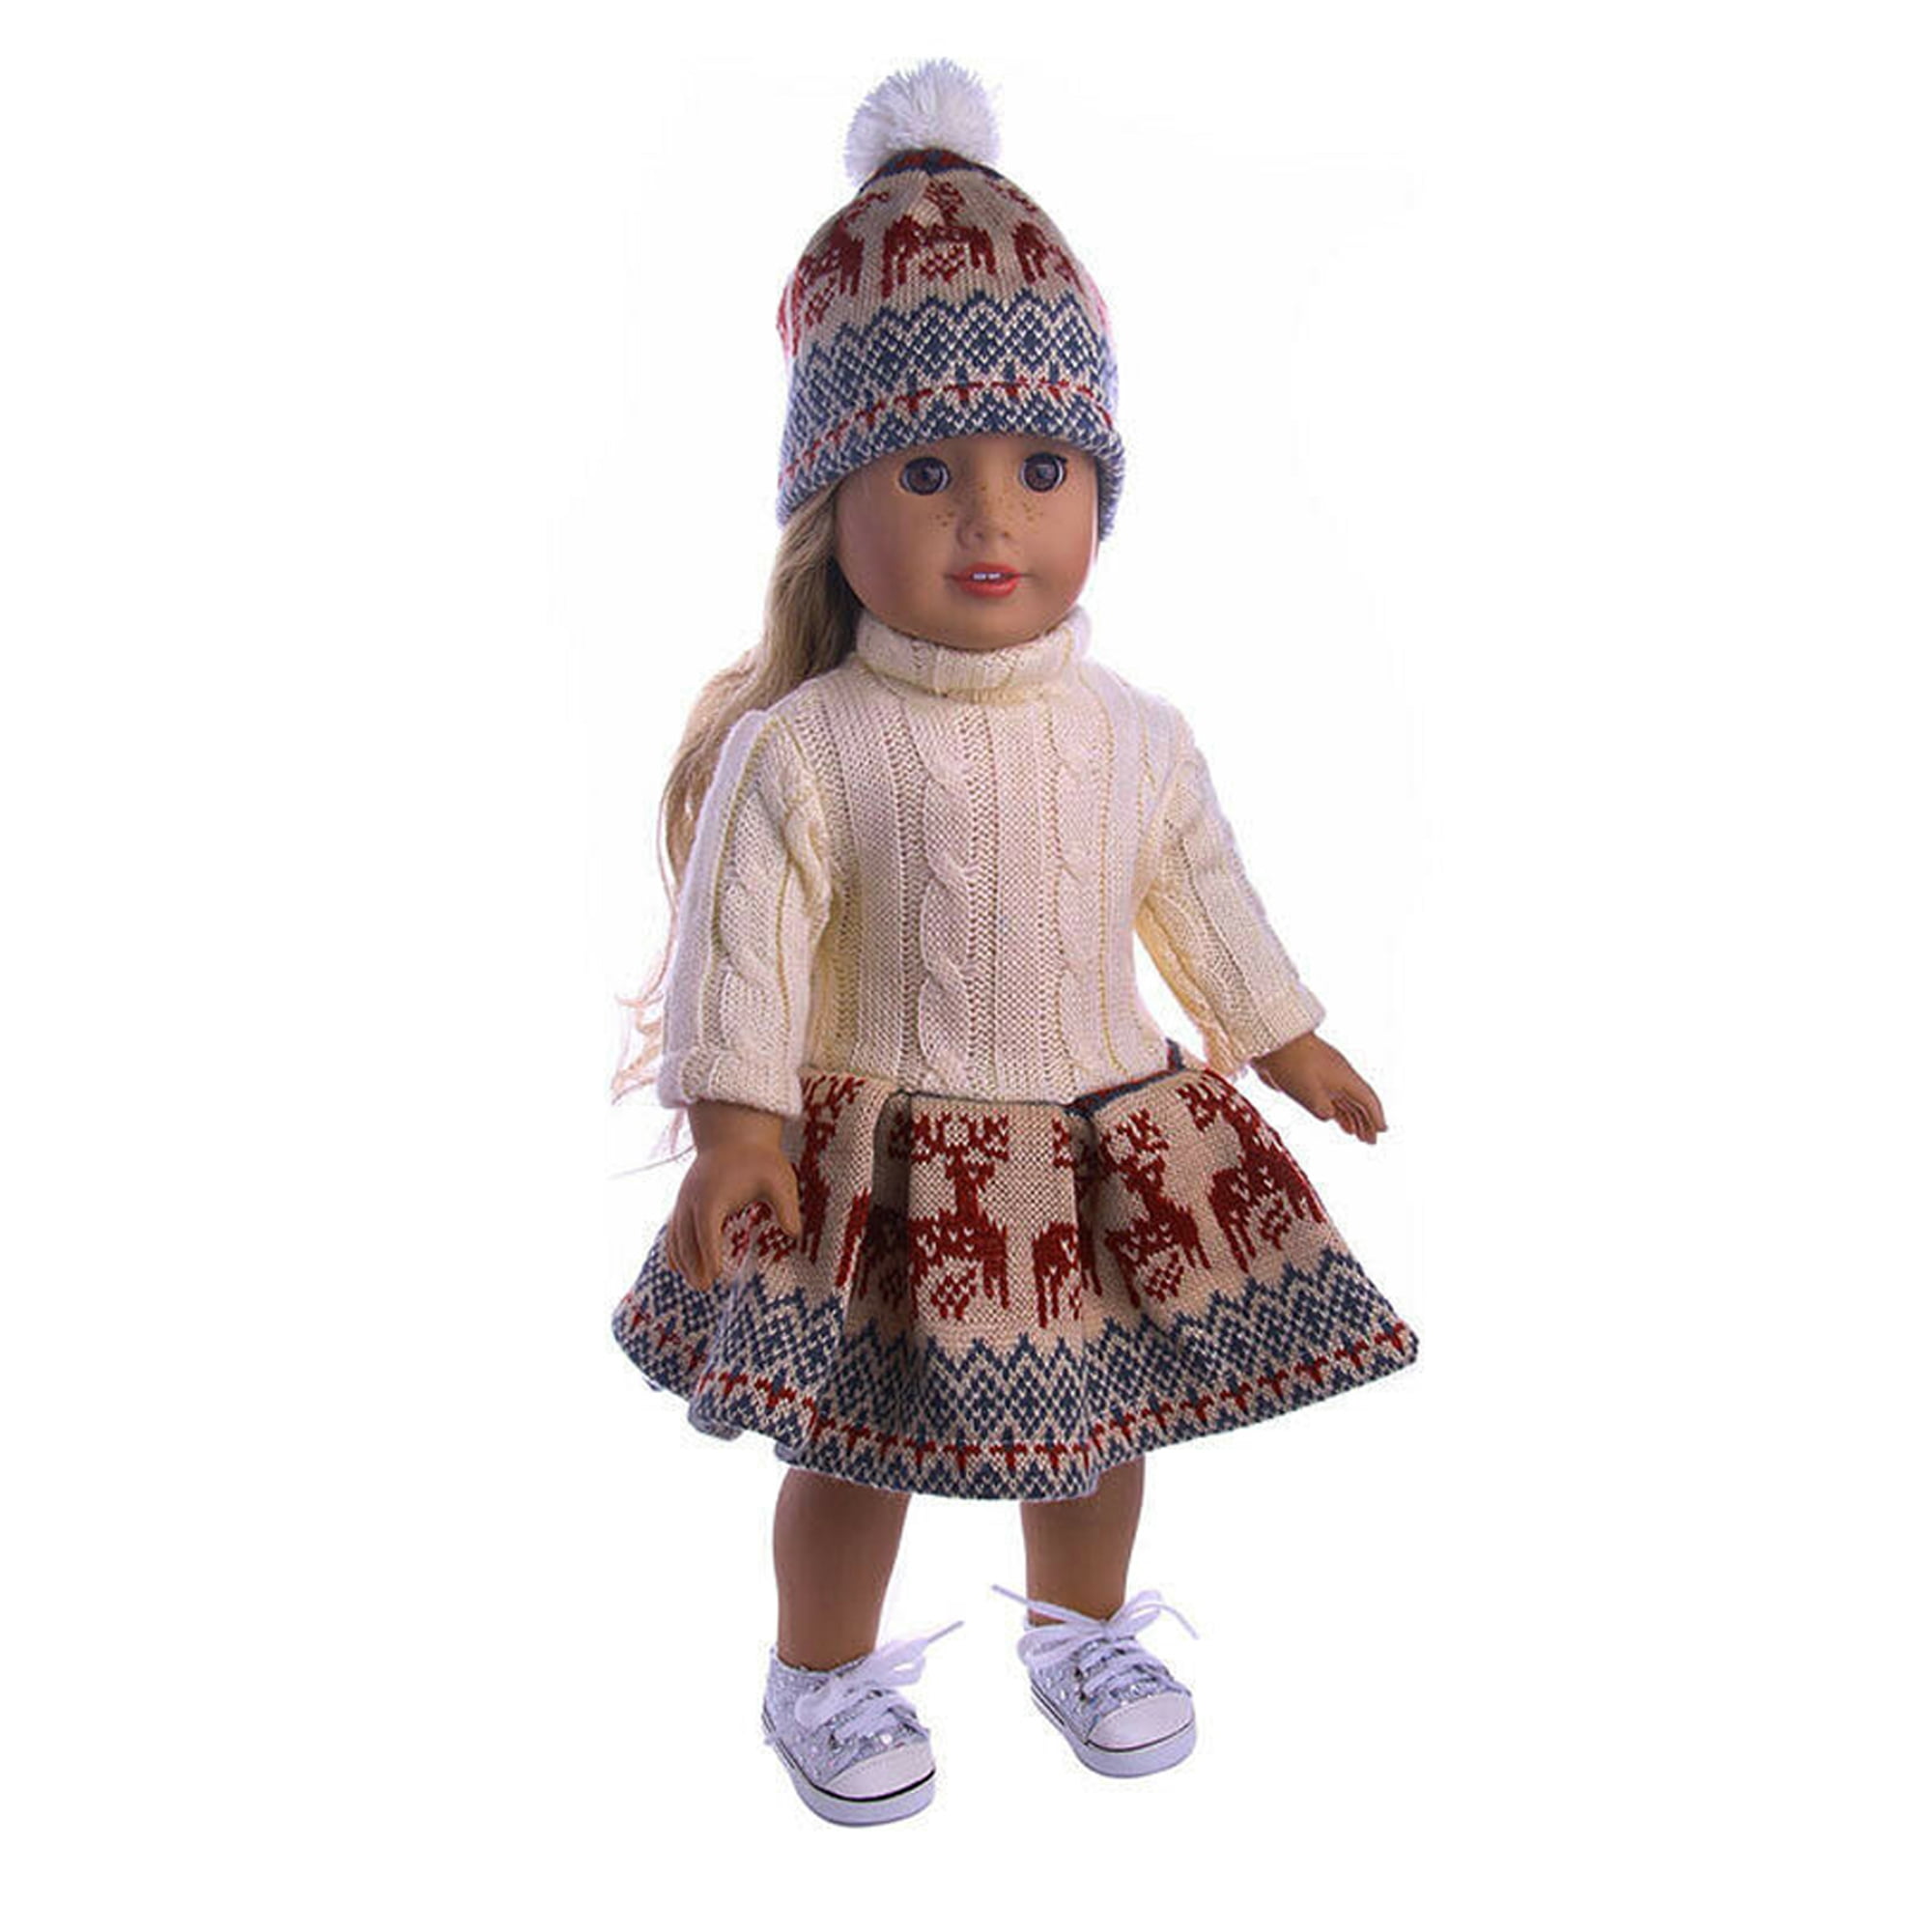 Dolls Hand Knitted Cardigan & Hat fits 18" dolls Our Generation AG D/Friend PNK 